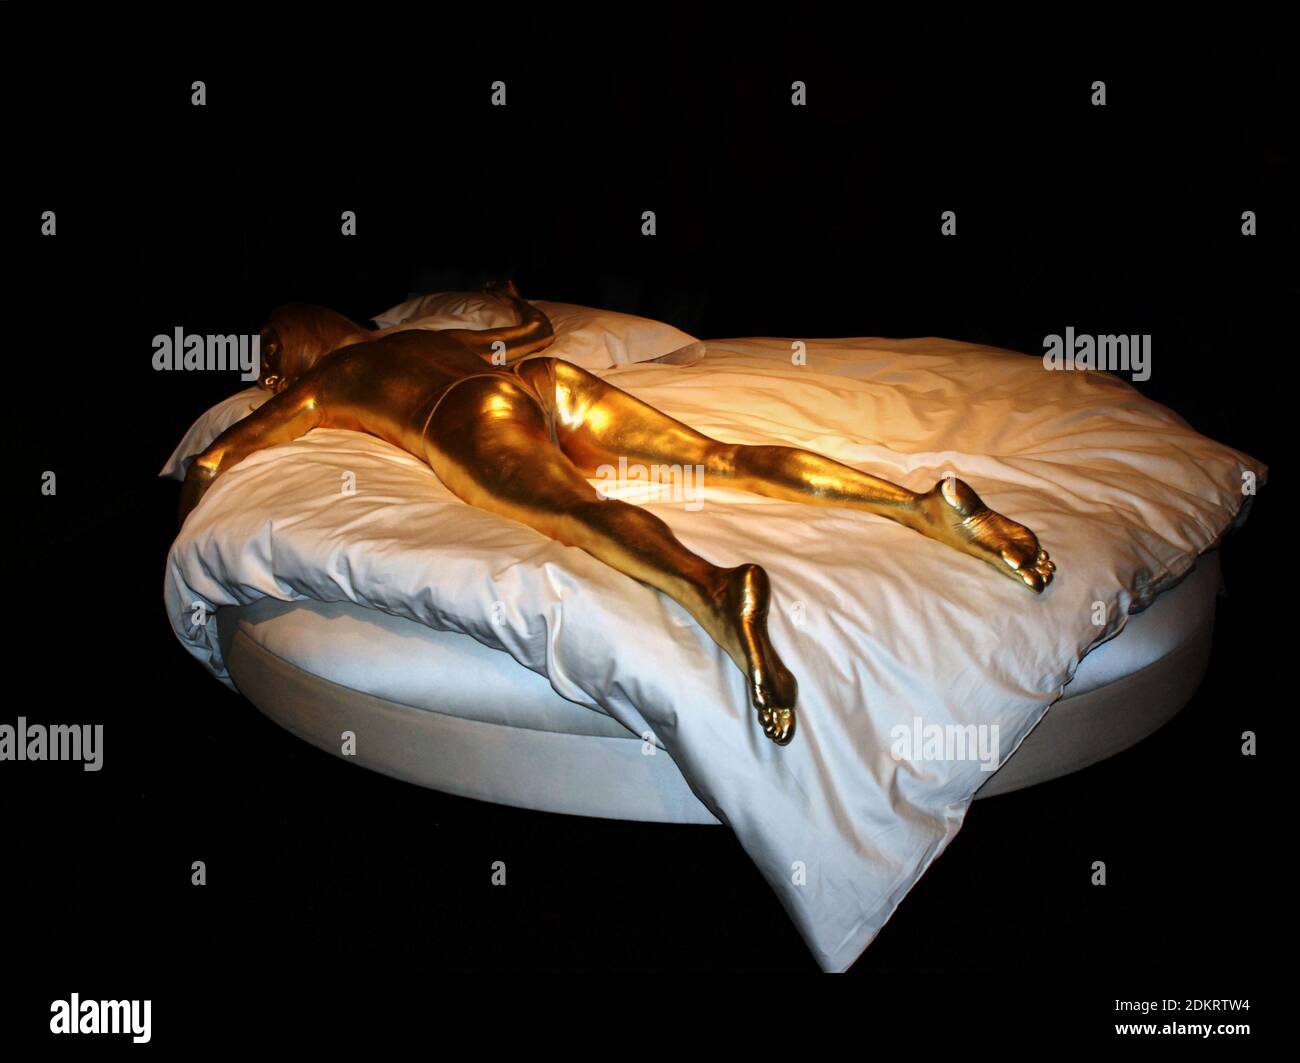 Display from Designing 007: 50 Years of Bond Style exhibition at London's Barbican A replica of Goldfinger's Shirley Eaton lies dead on a crumpled bed Stock Photo